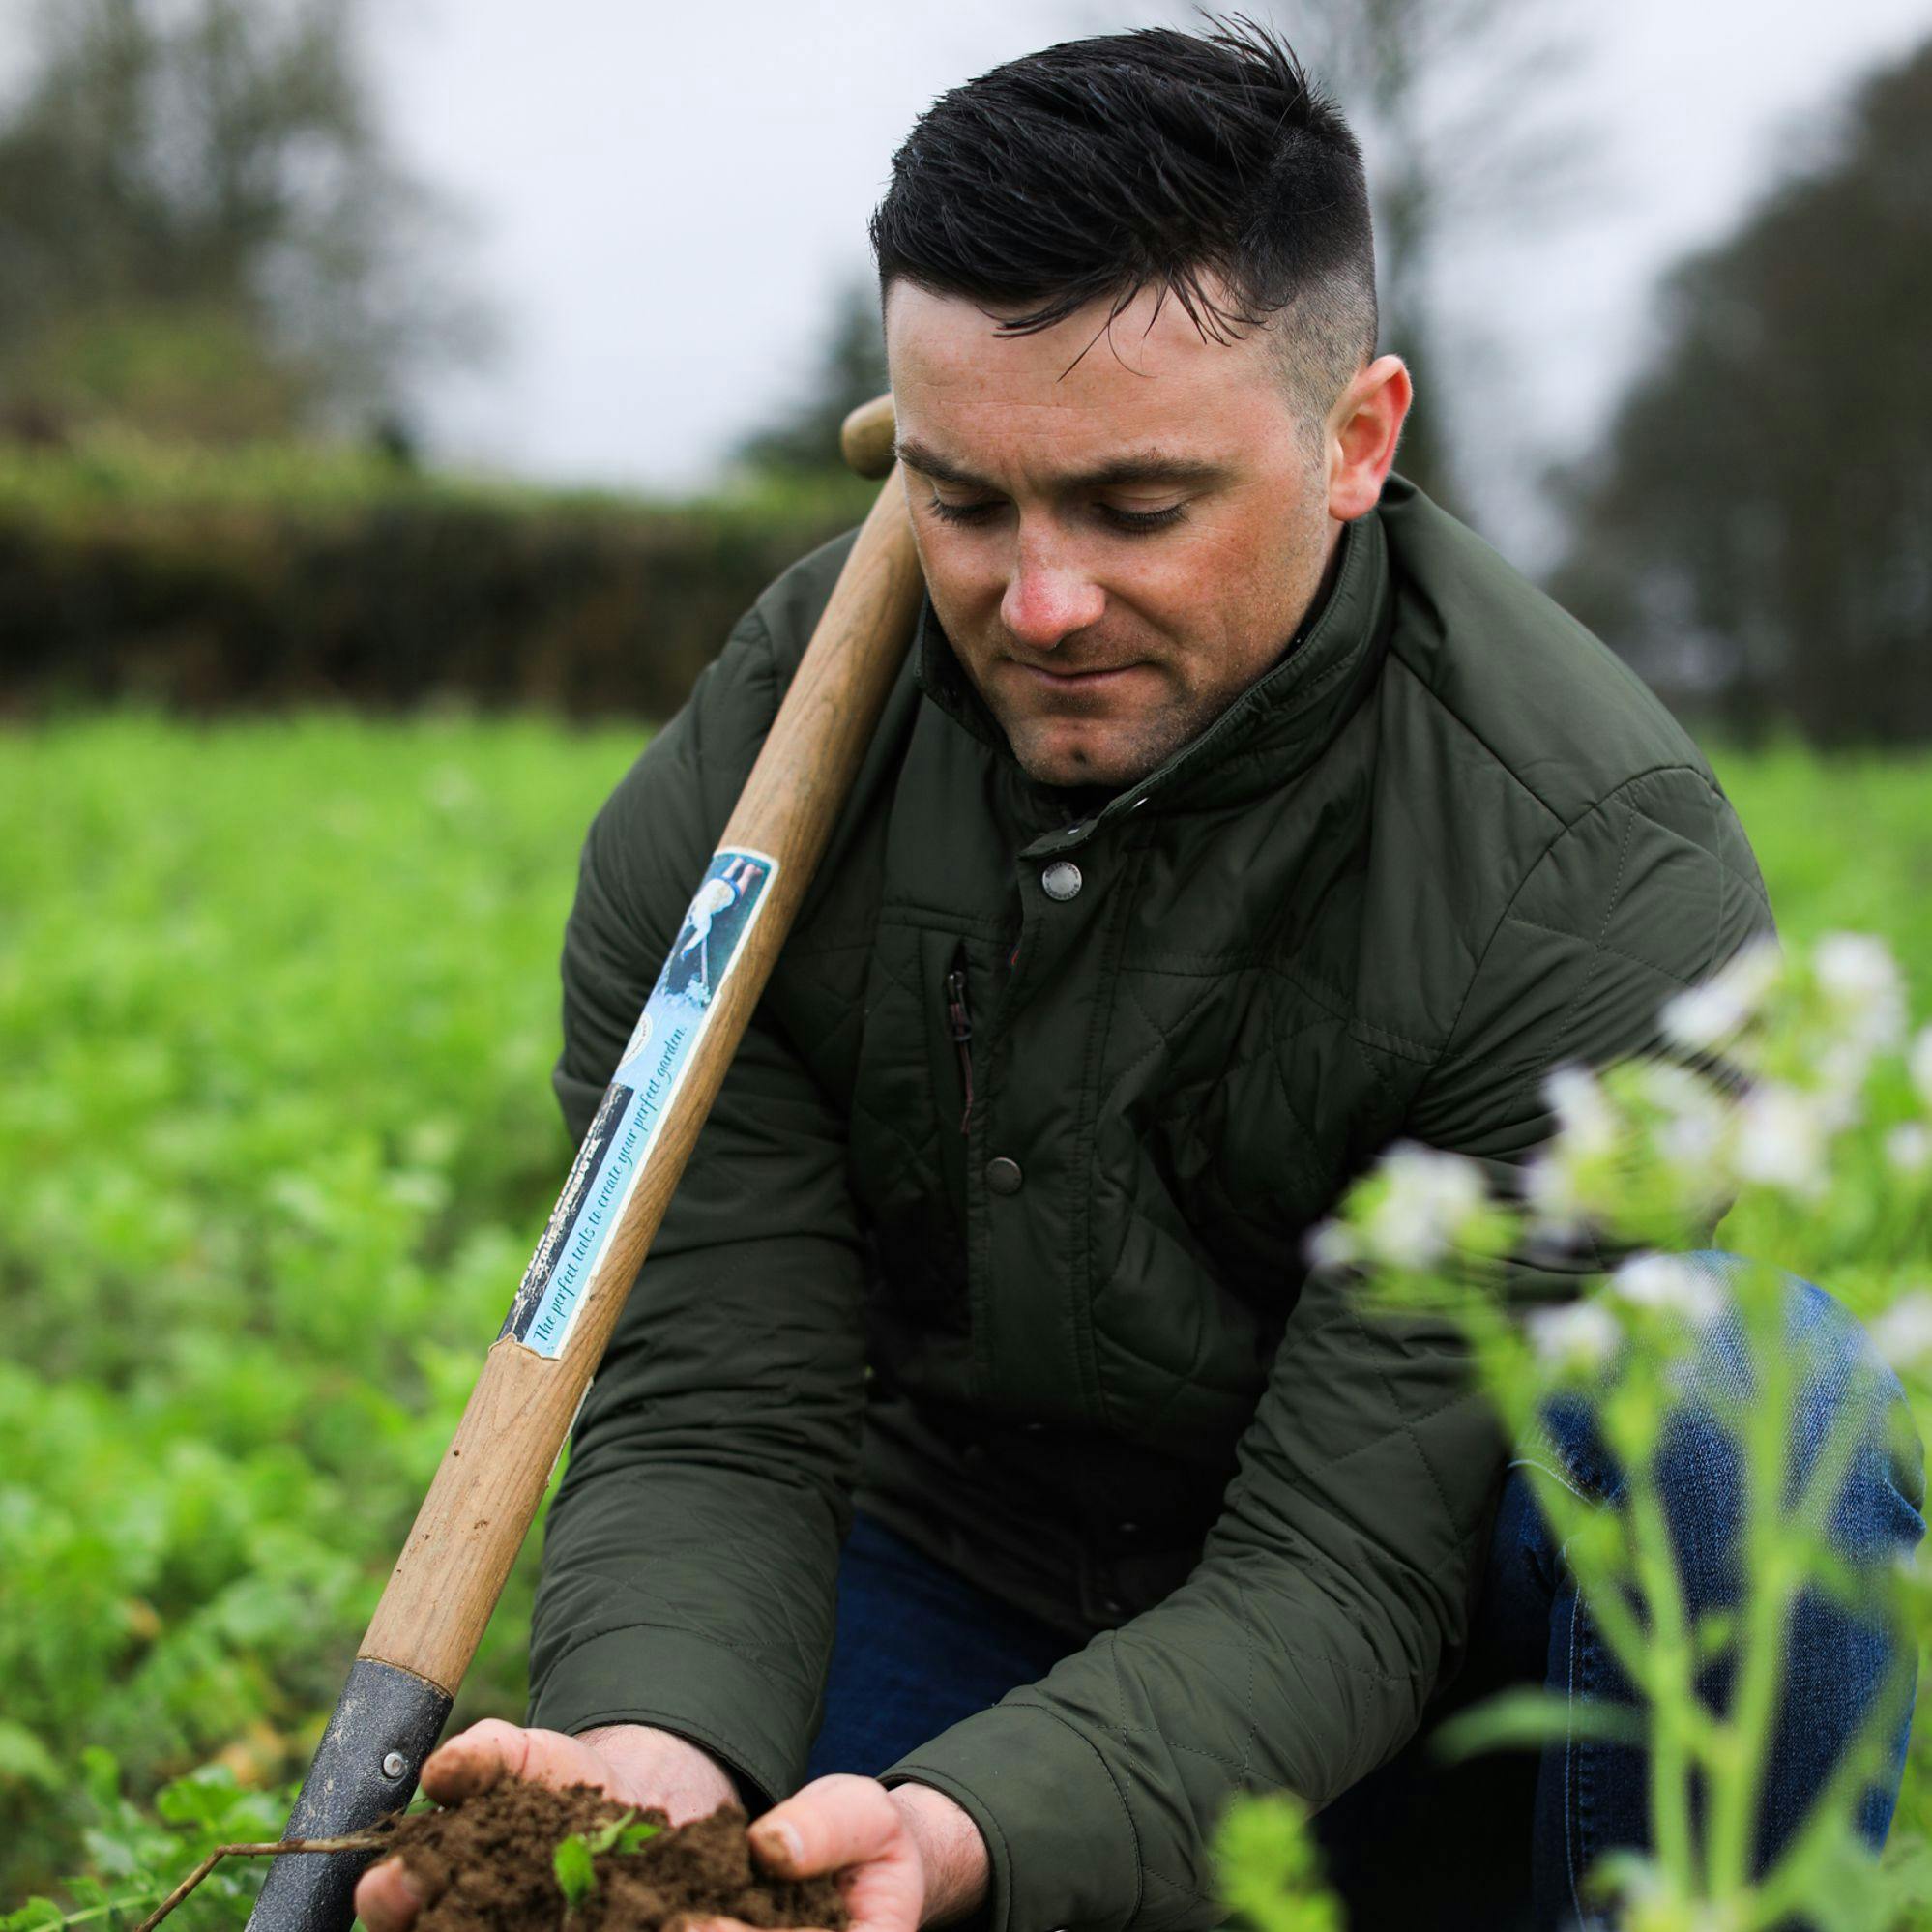 Walter Furlong Junior of the Guinness regenerative agriculture programme picking up a soil sample